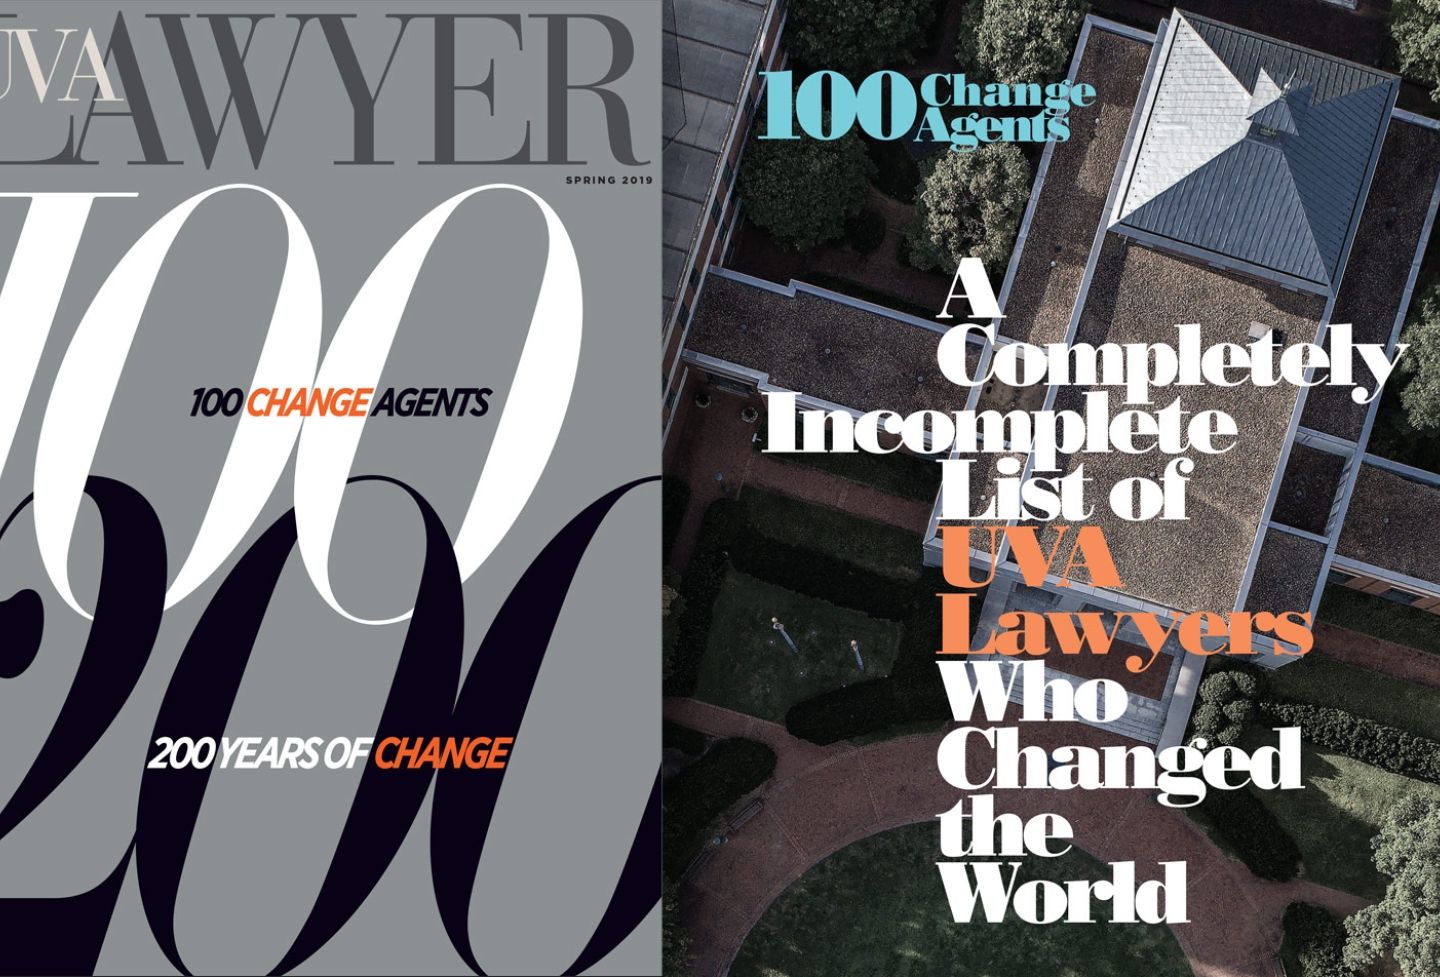 The cover of UVA Lawyer Spring 2019 edition